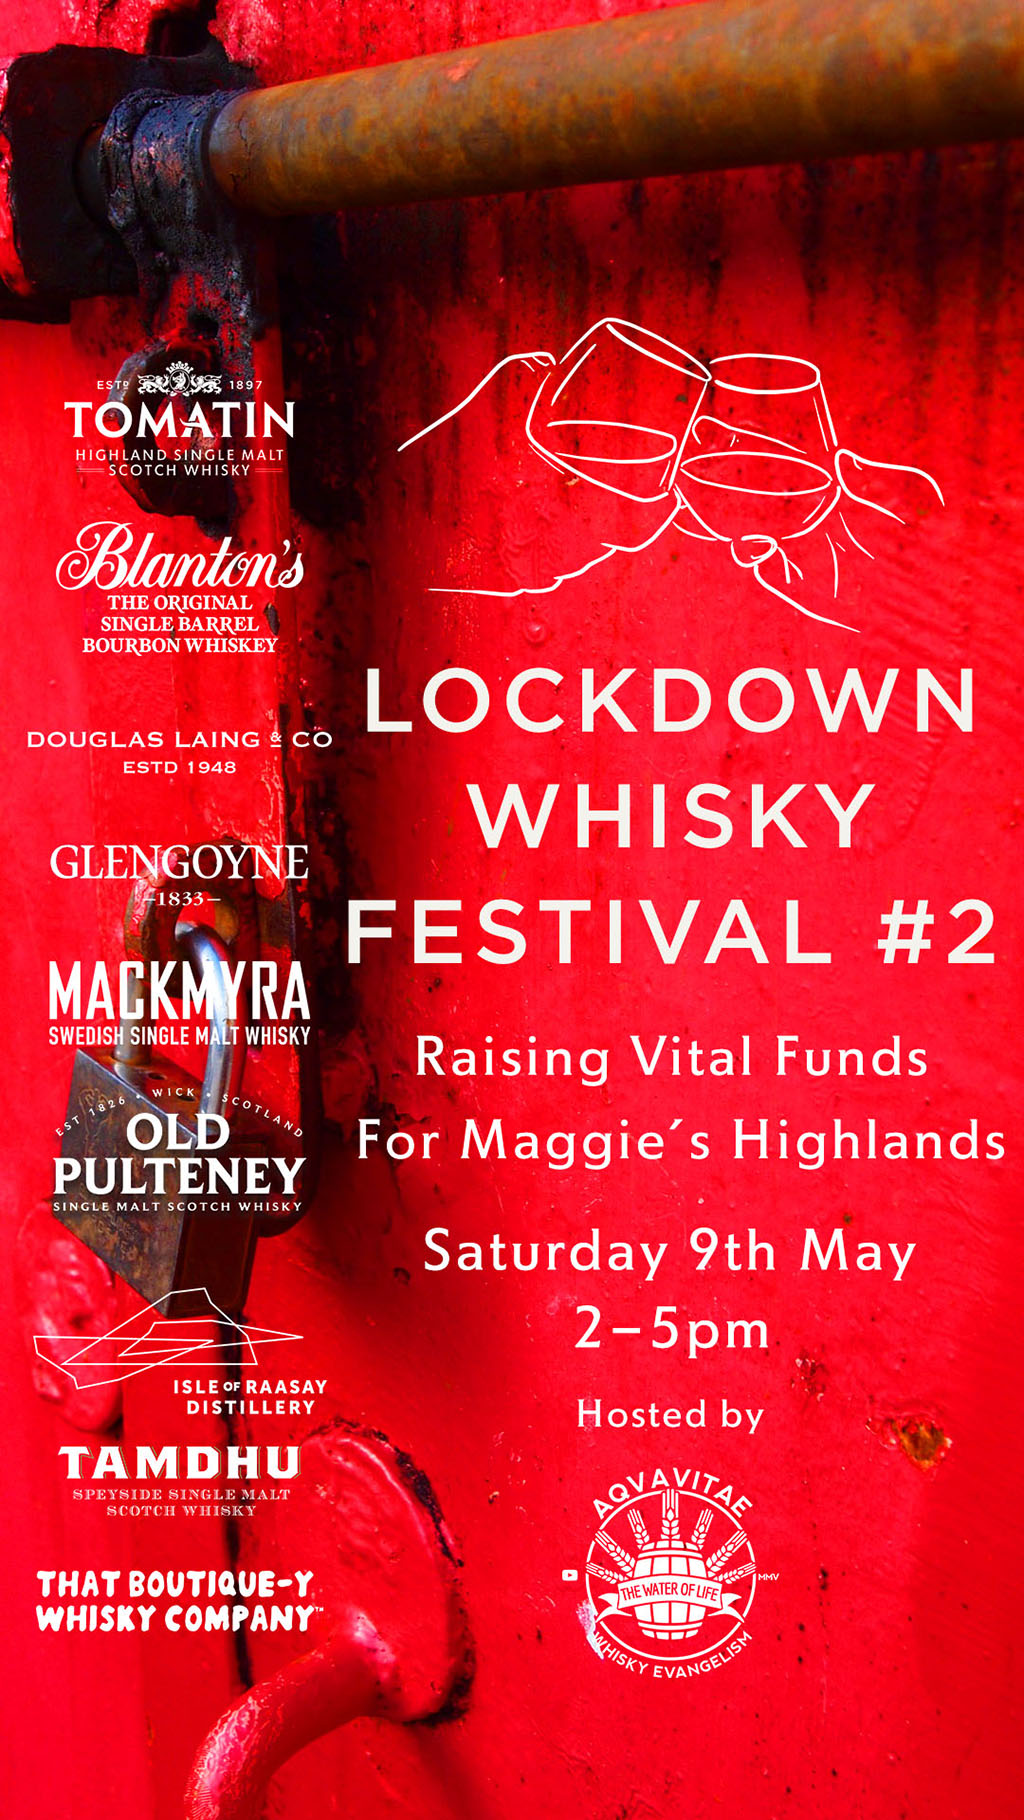 Lockdown whisky featival.